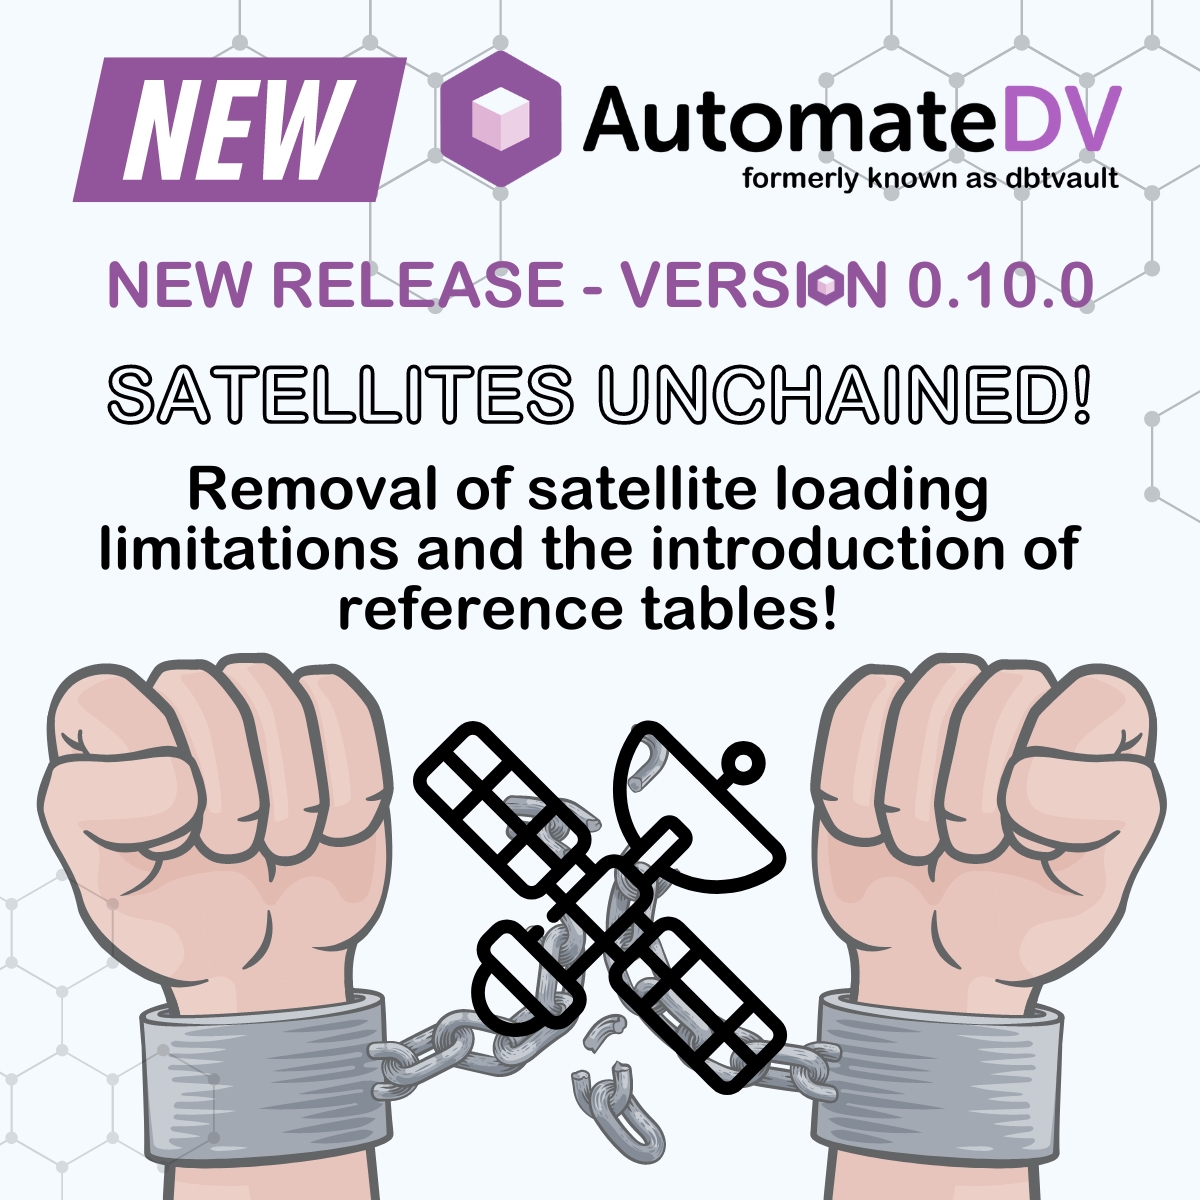 🚀 AutomateDV Version 0.10.0 is here! 🚀 With this release, we're thrilled to announce the elimination of satellite loading limitations. AutomateDV 0.10.0 brings unparalleled loading improvements, ensuring smoother experiences for users. github.com/Datavault-UK/a… #dbt #DataVault